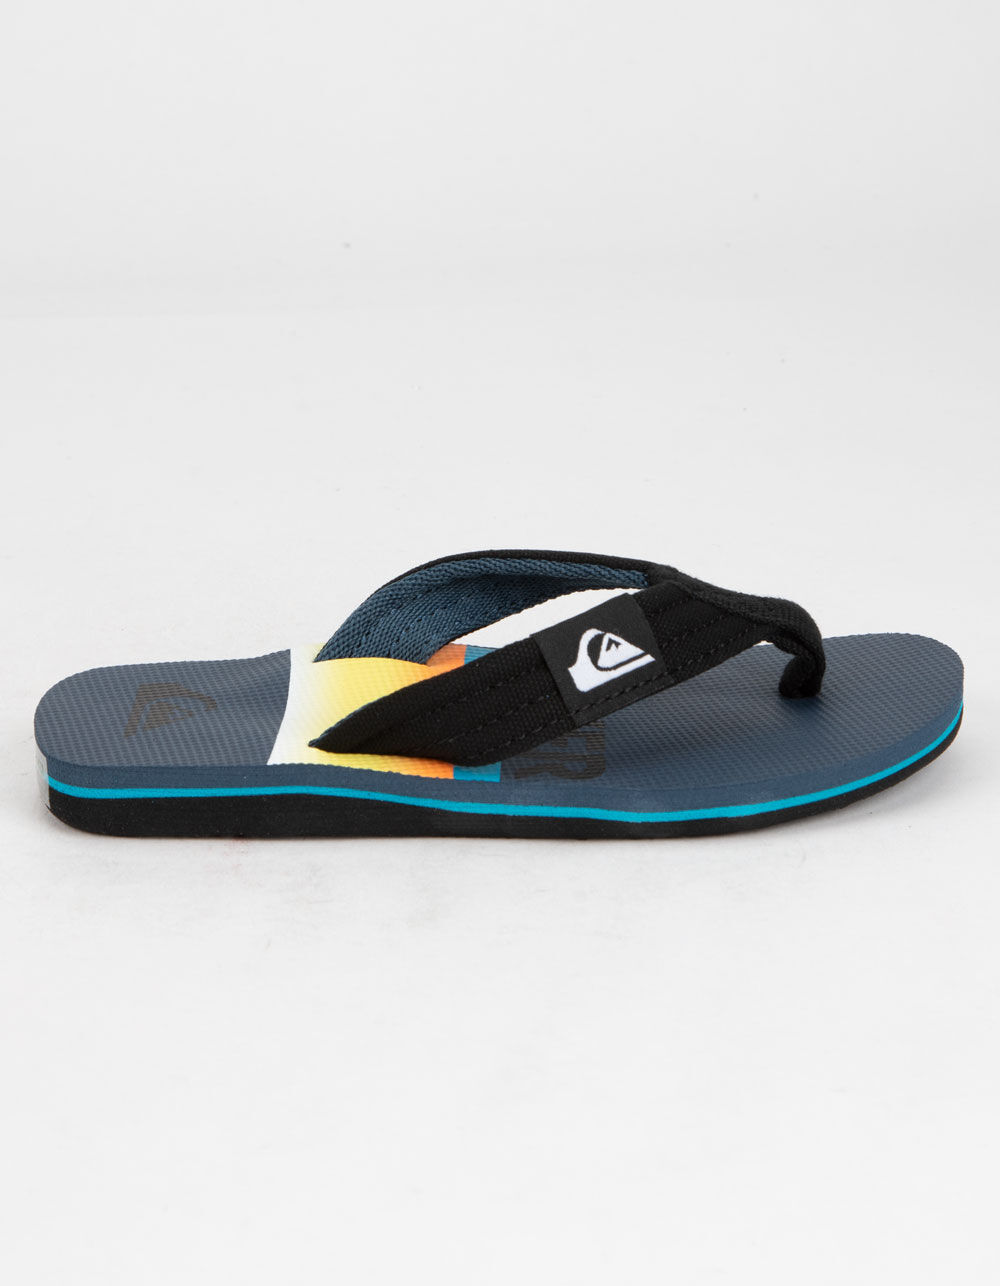 QUIKSILVER Molokai Layback Boys Sandals image number 2